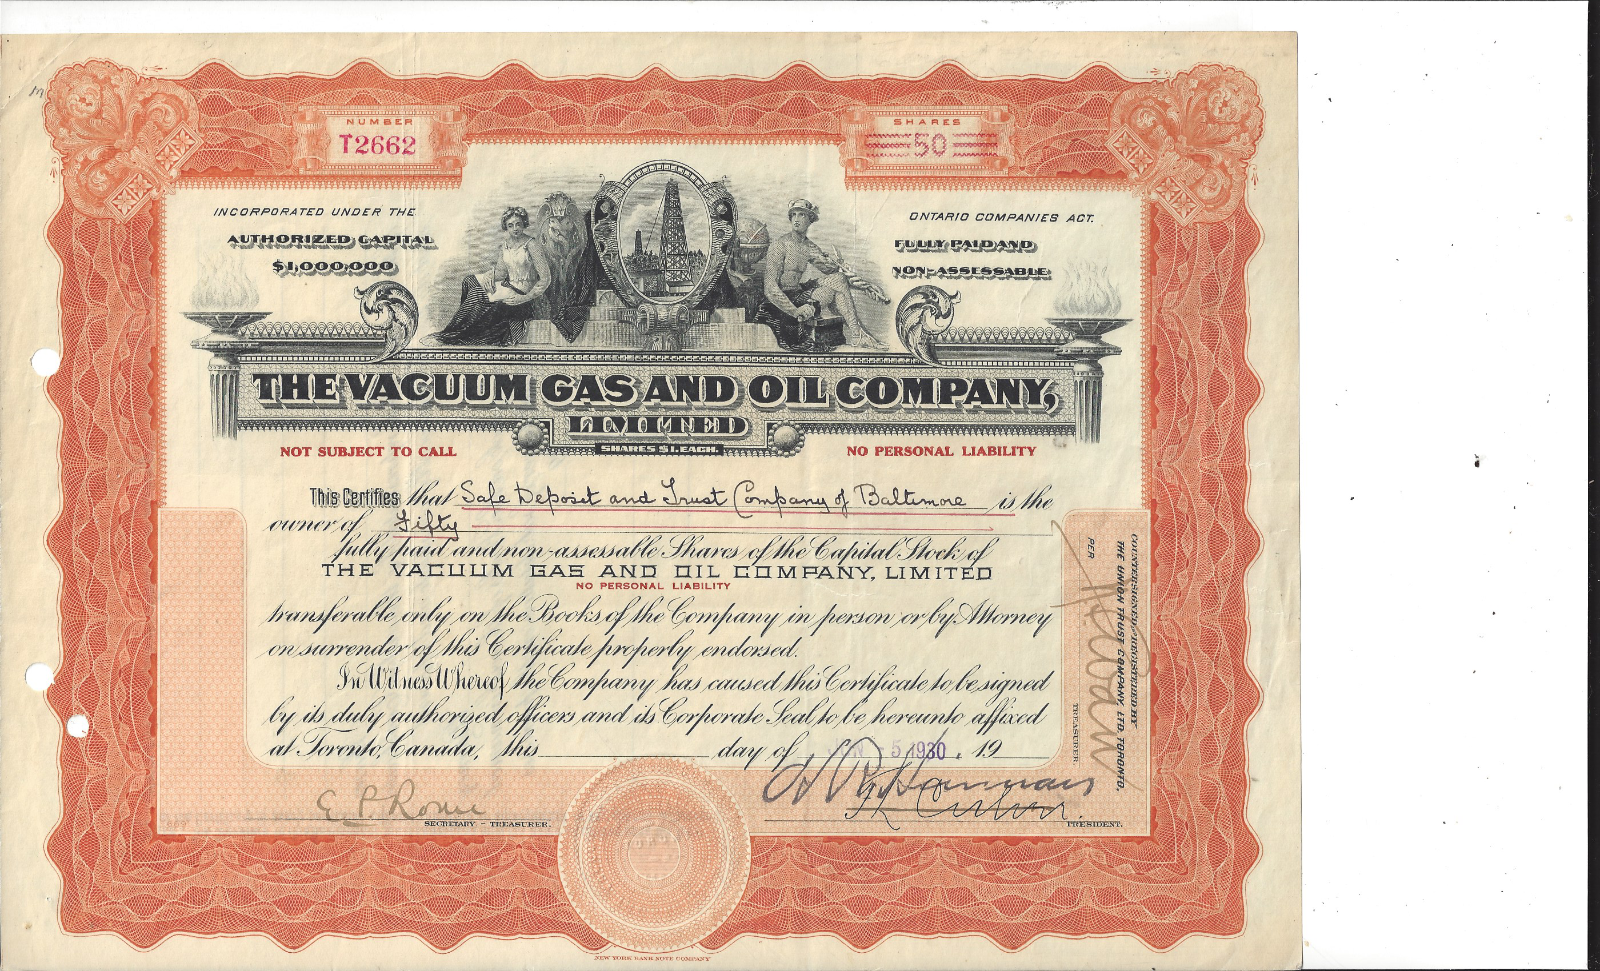 THE VACUUM GAS AND OIL COMPANY LIMITED (CANADA)...1930 STOCK CERTIFICATE